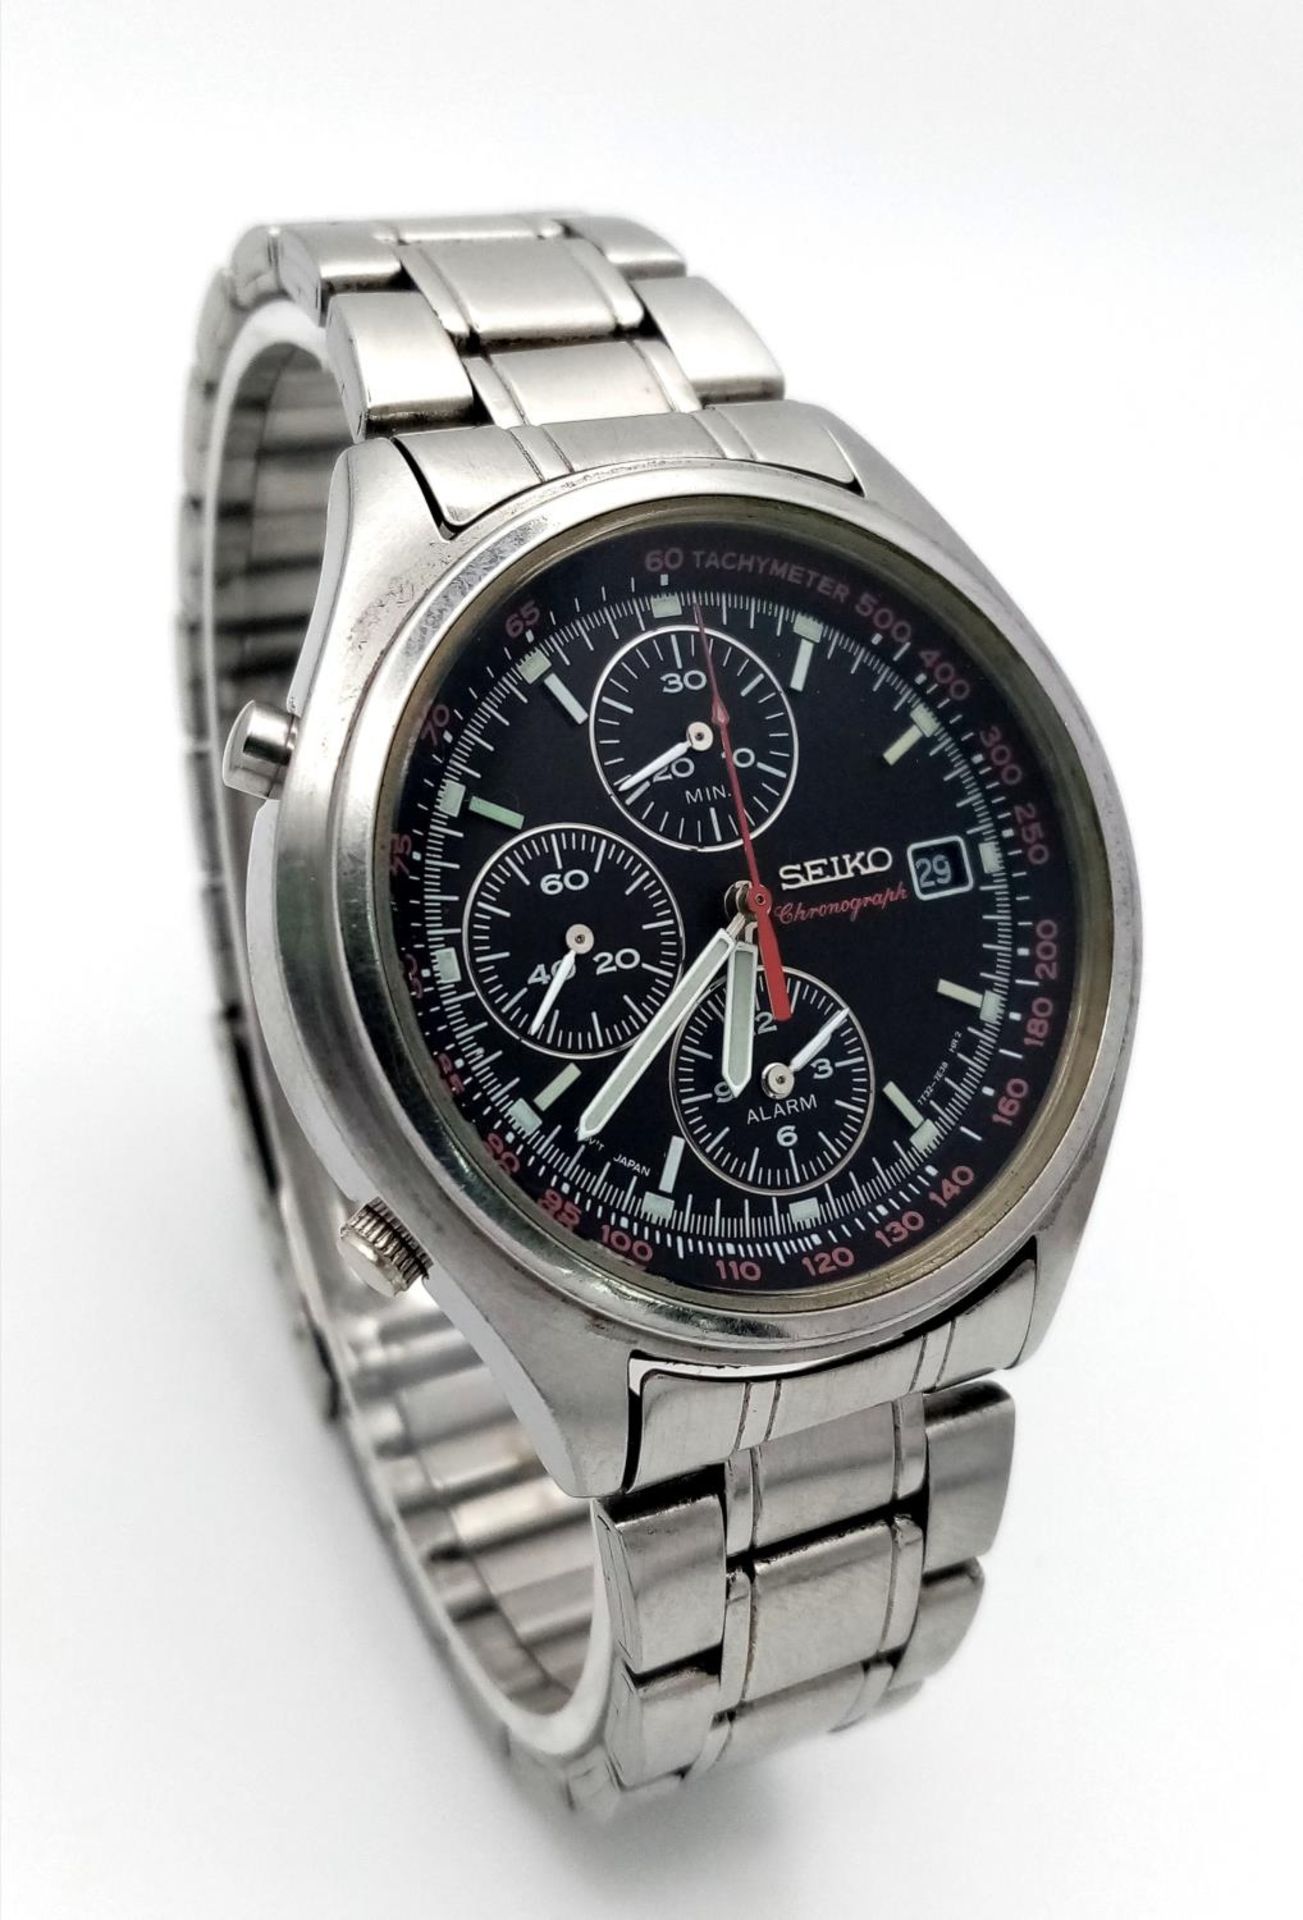 A Seiko Chronograph Quartz Alarm Gents Watch. Stainless steel bracelet and case - 38mm. Black dial